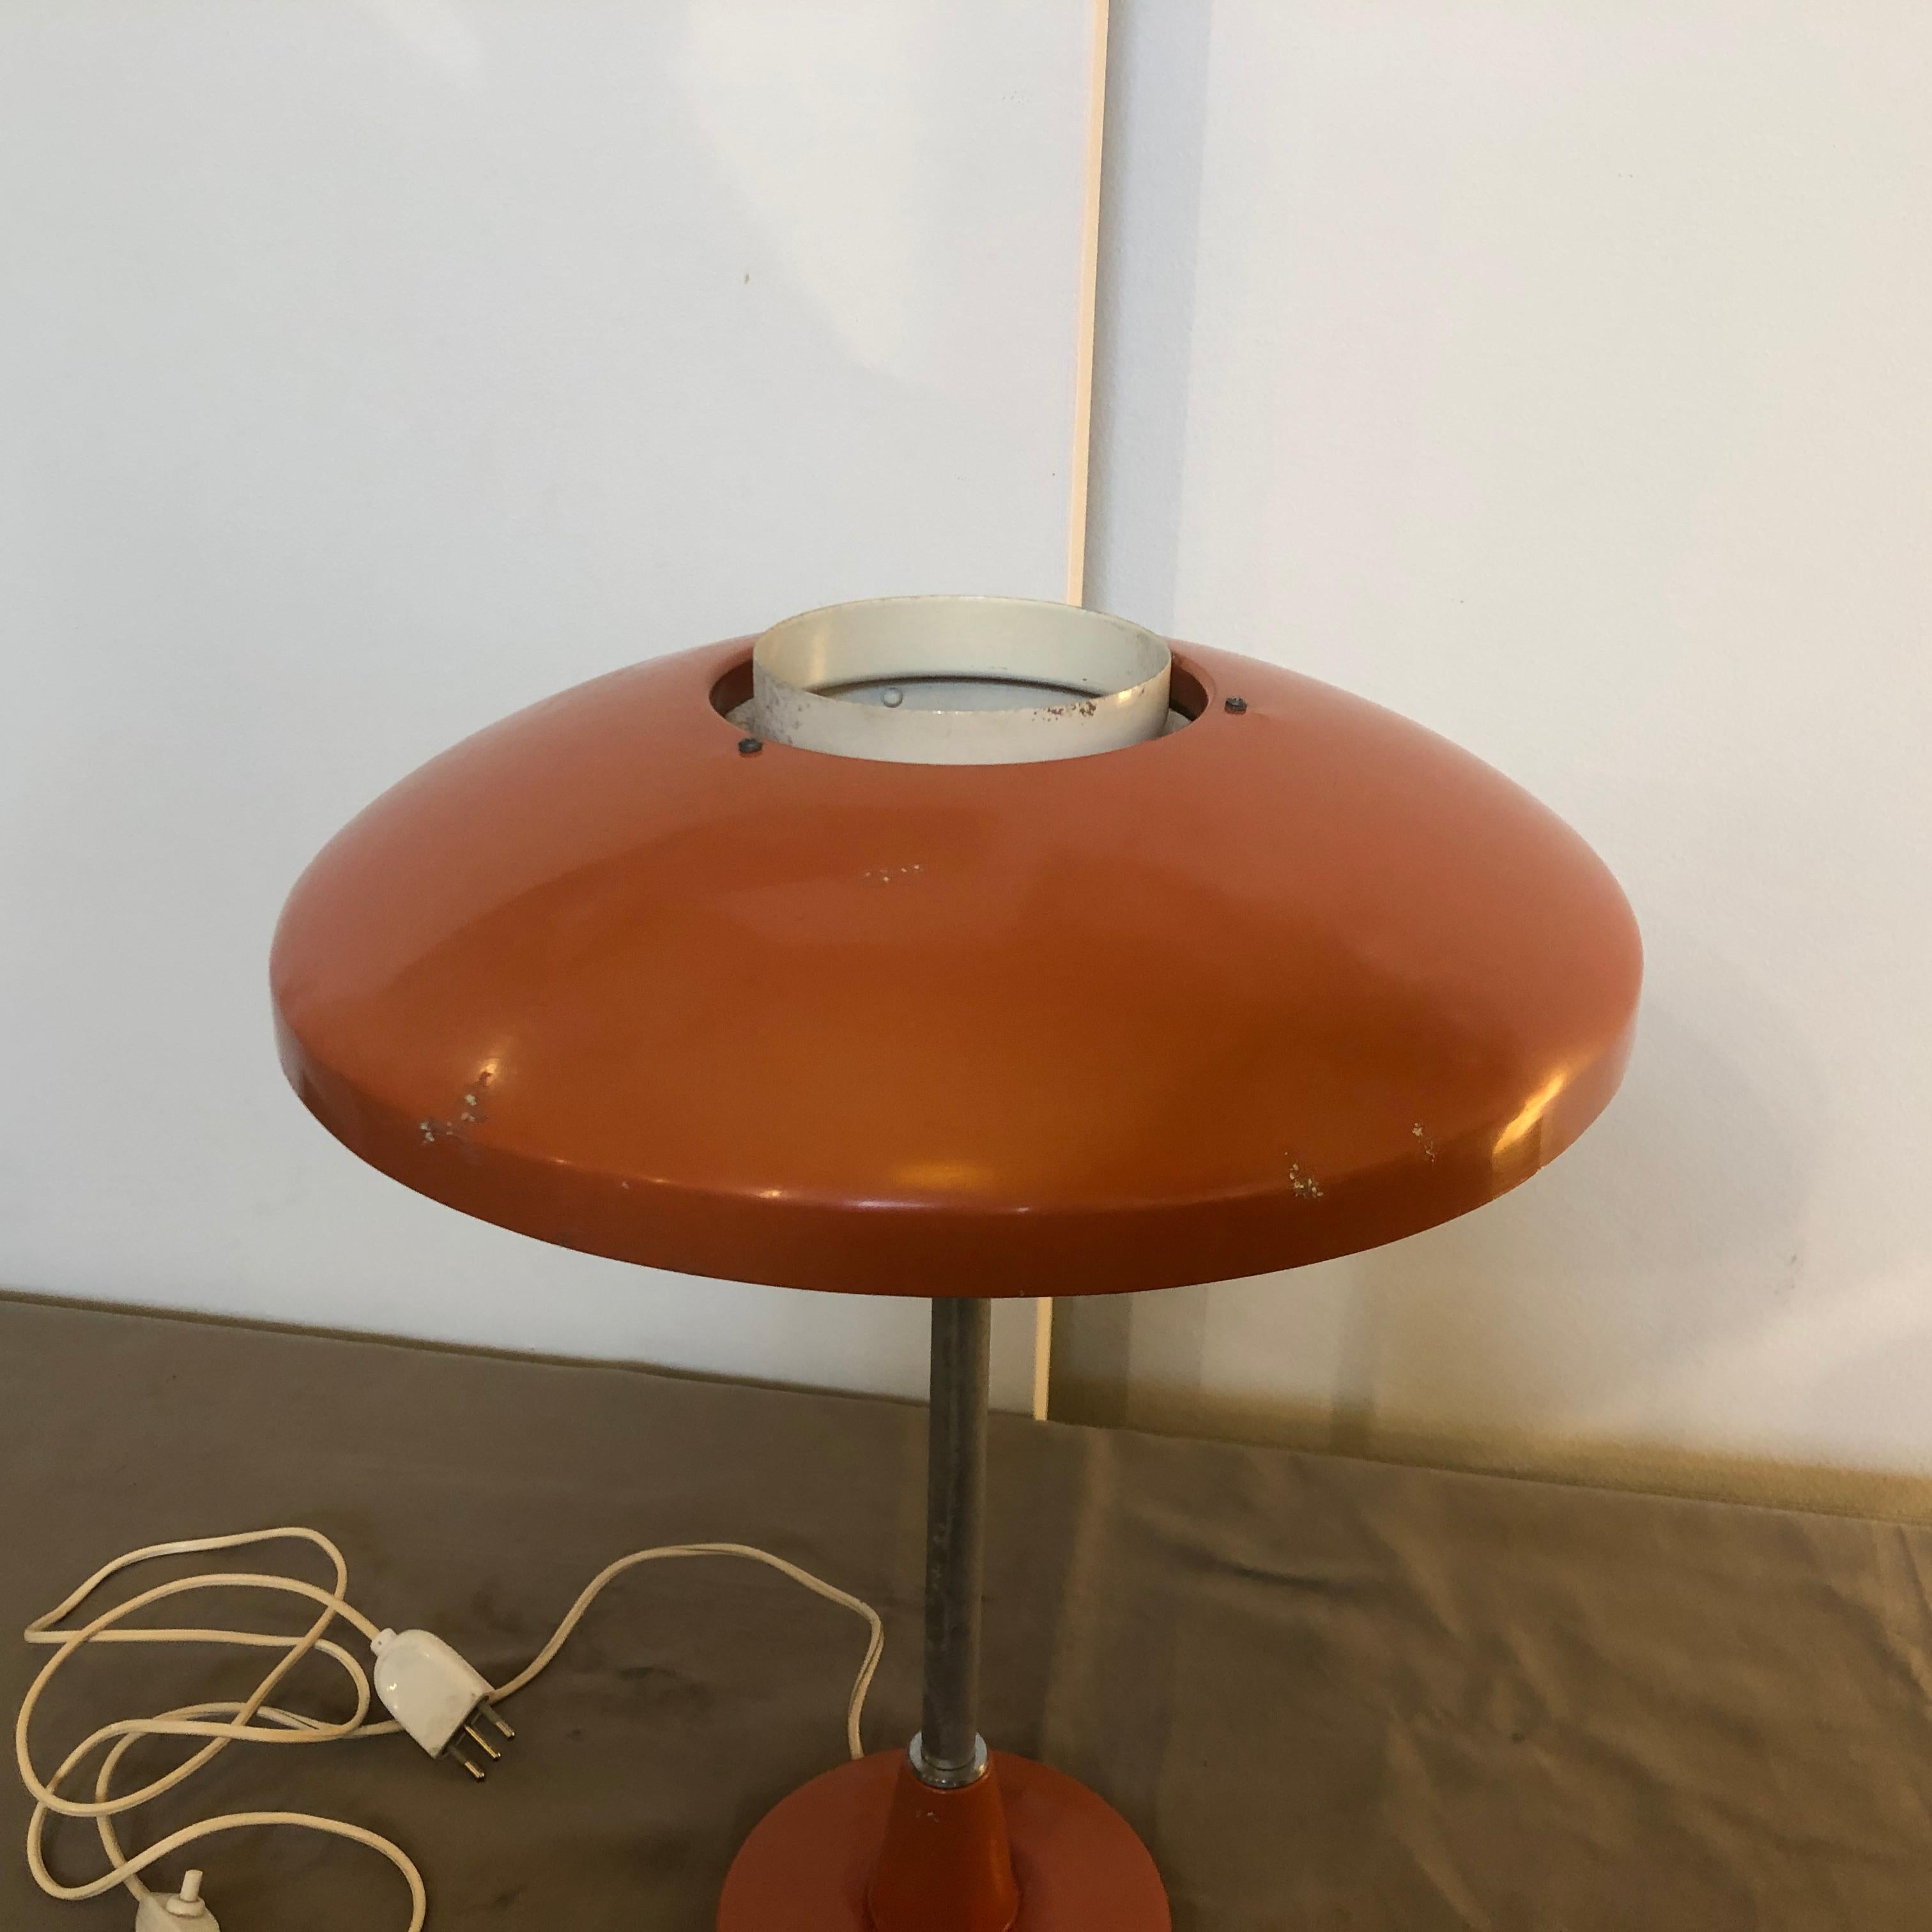 A Table lamp mod. 8022 by Stilnovo, Italy, 1960s. Lacquered aluminium, marked with manufacture label. It's in original conditions. This table lamp exhibits the iconic style and innovative design that Stilnovo was known for during that era. Stilnovo